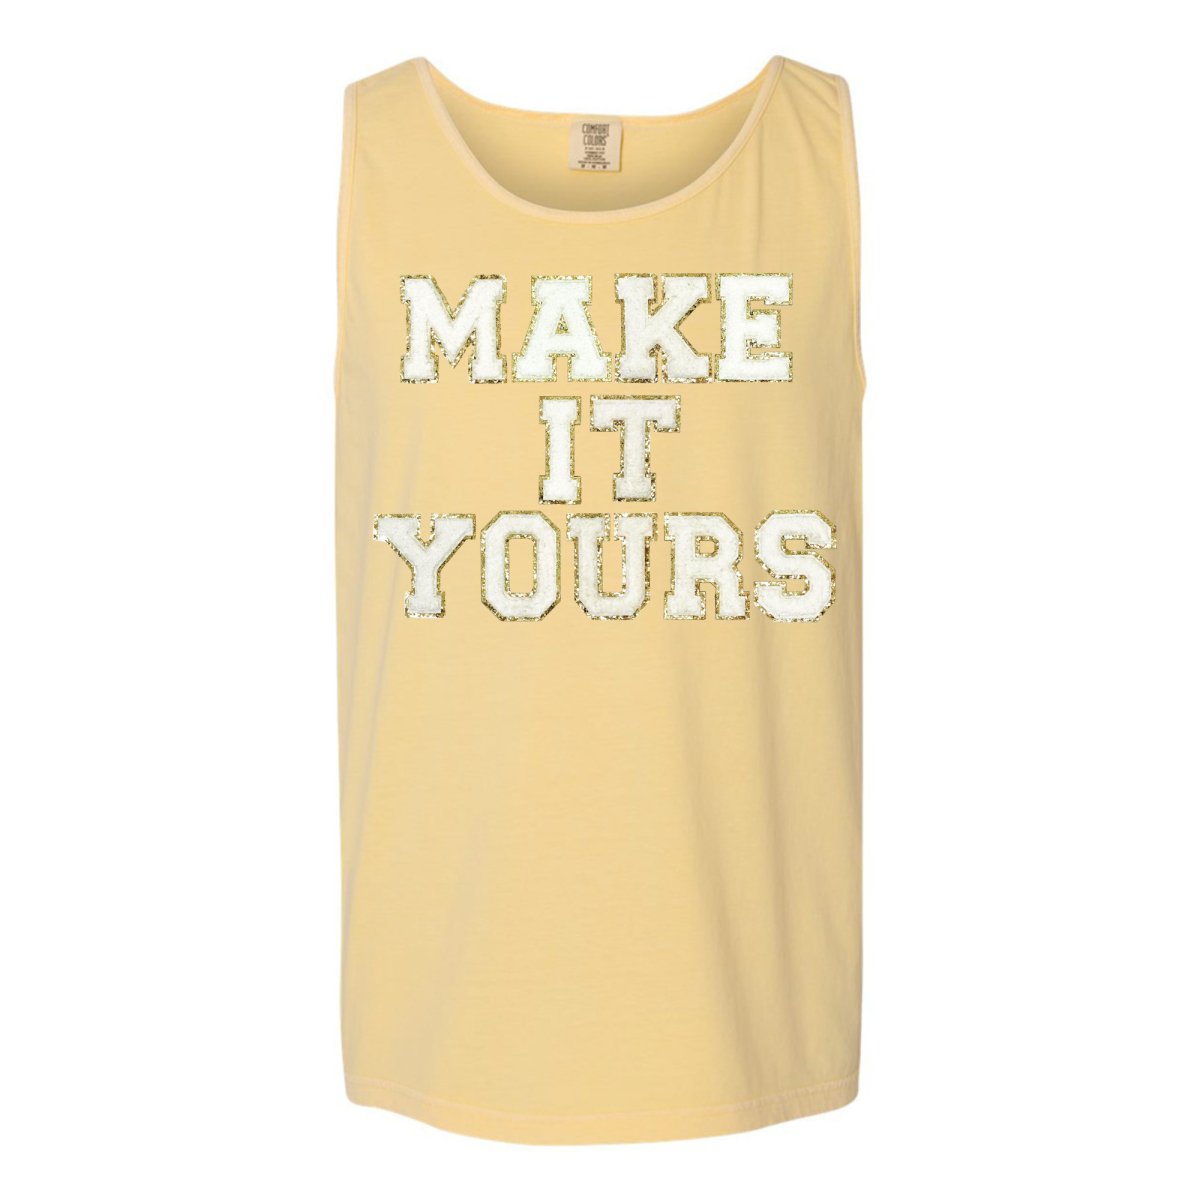 Make It Yours™ Letter Patch Tank Top - United Monograms